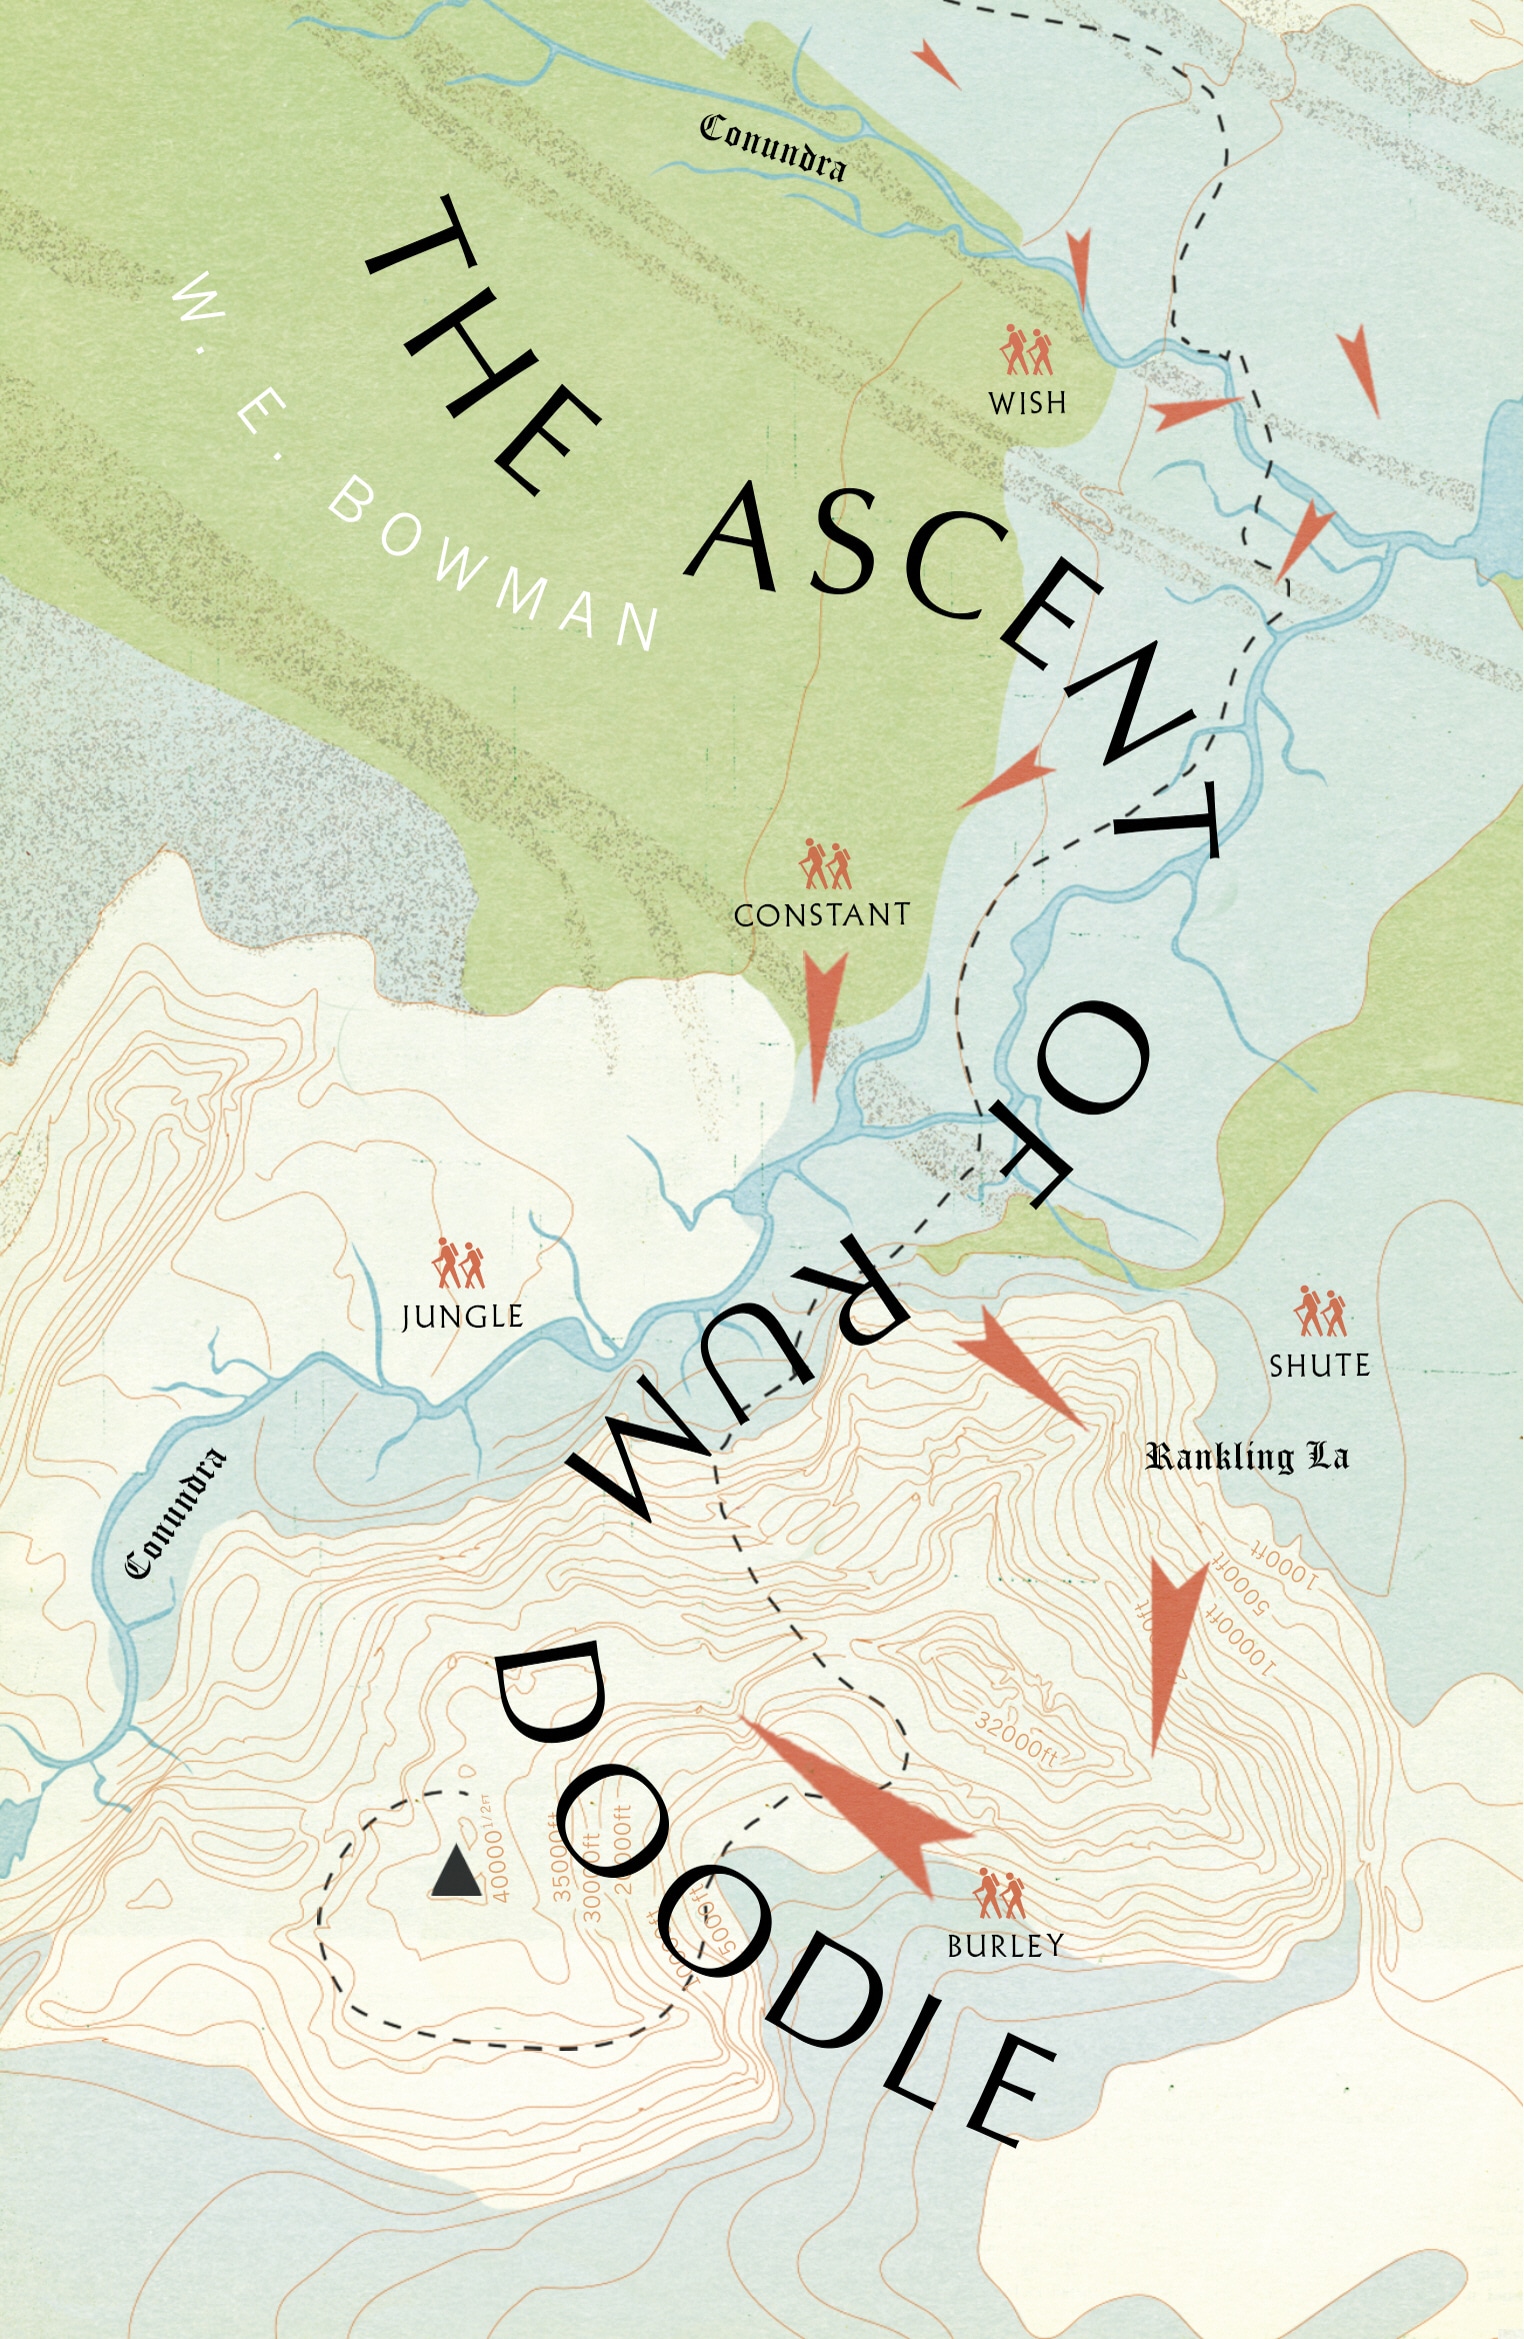 Book “The Ascent Of Rum Doodle” by W E Bowman — June 6, 2019